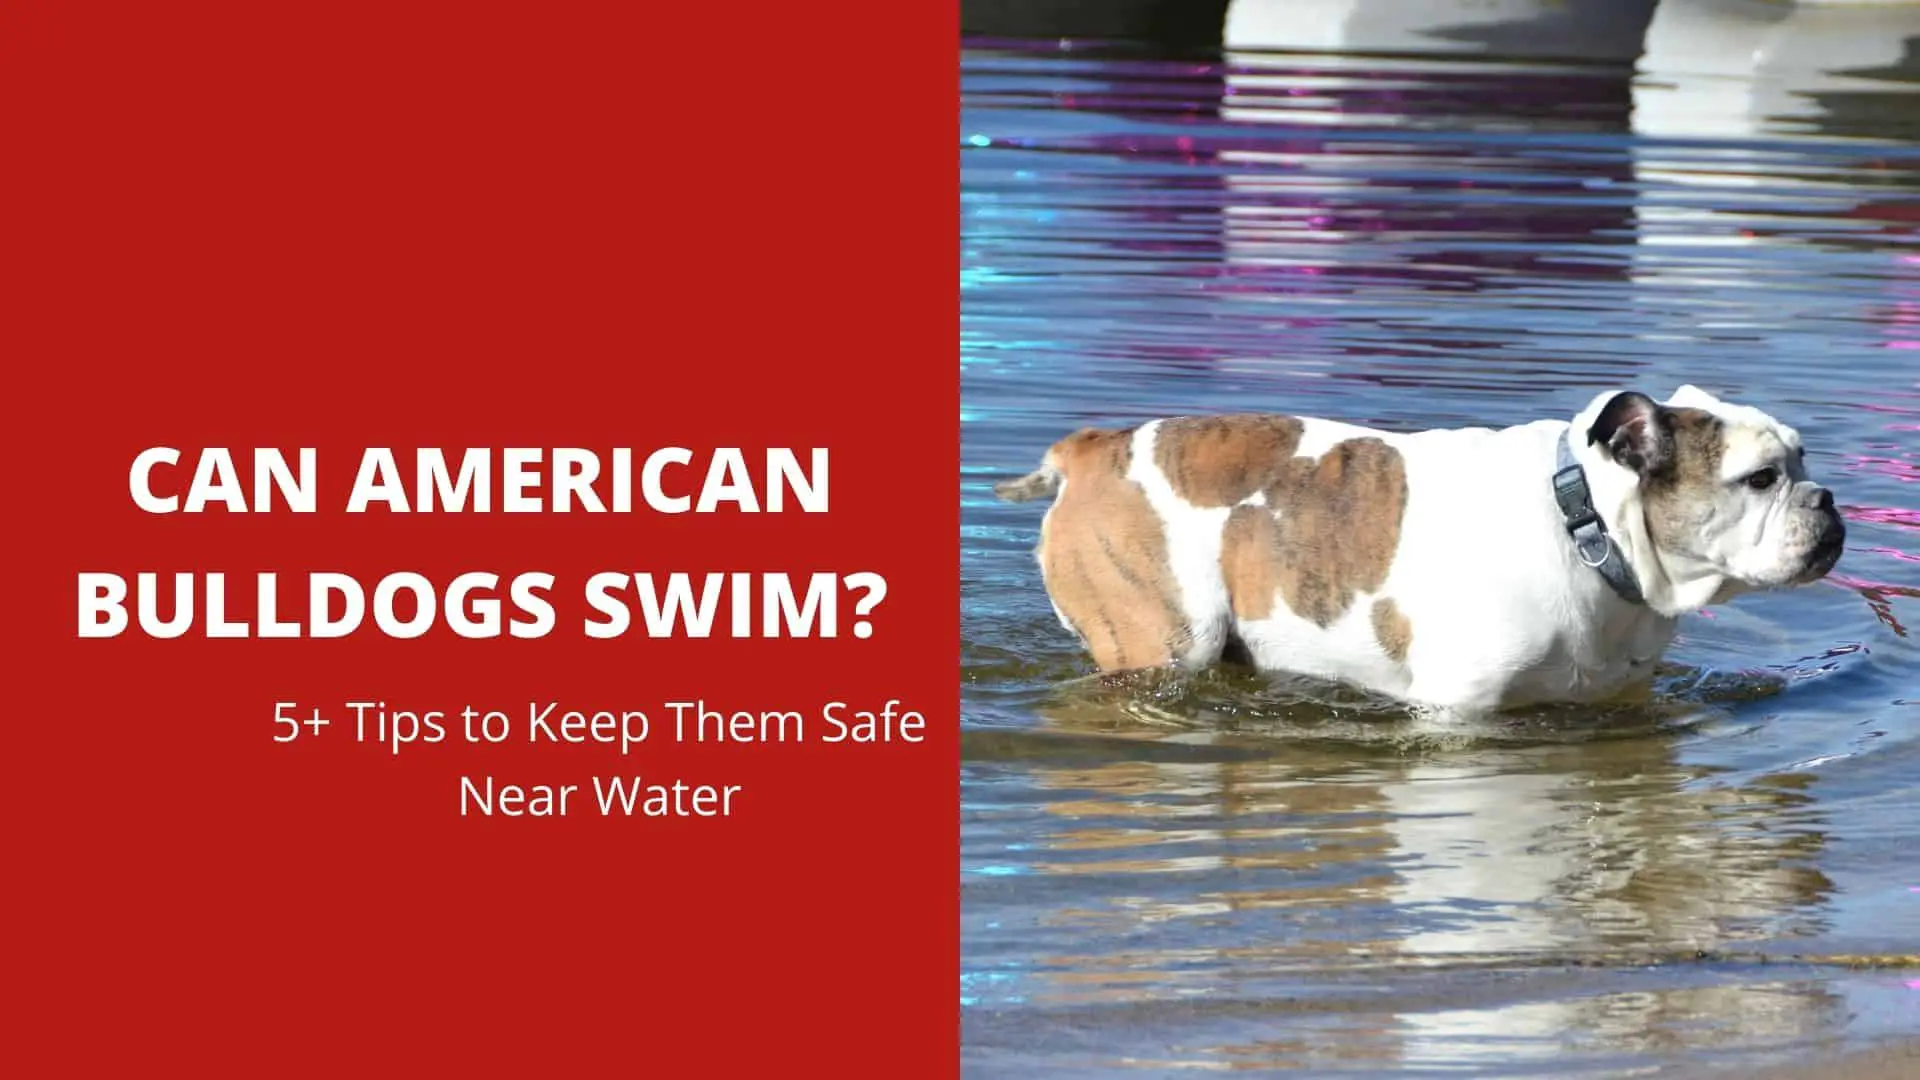 Can American Bulldogs Swim? 5+ Tips to Keep Them Safe Near Water